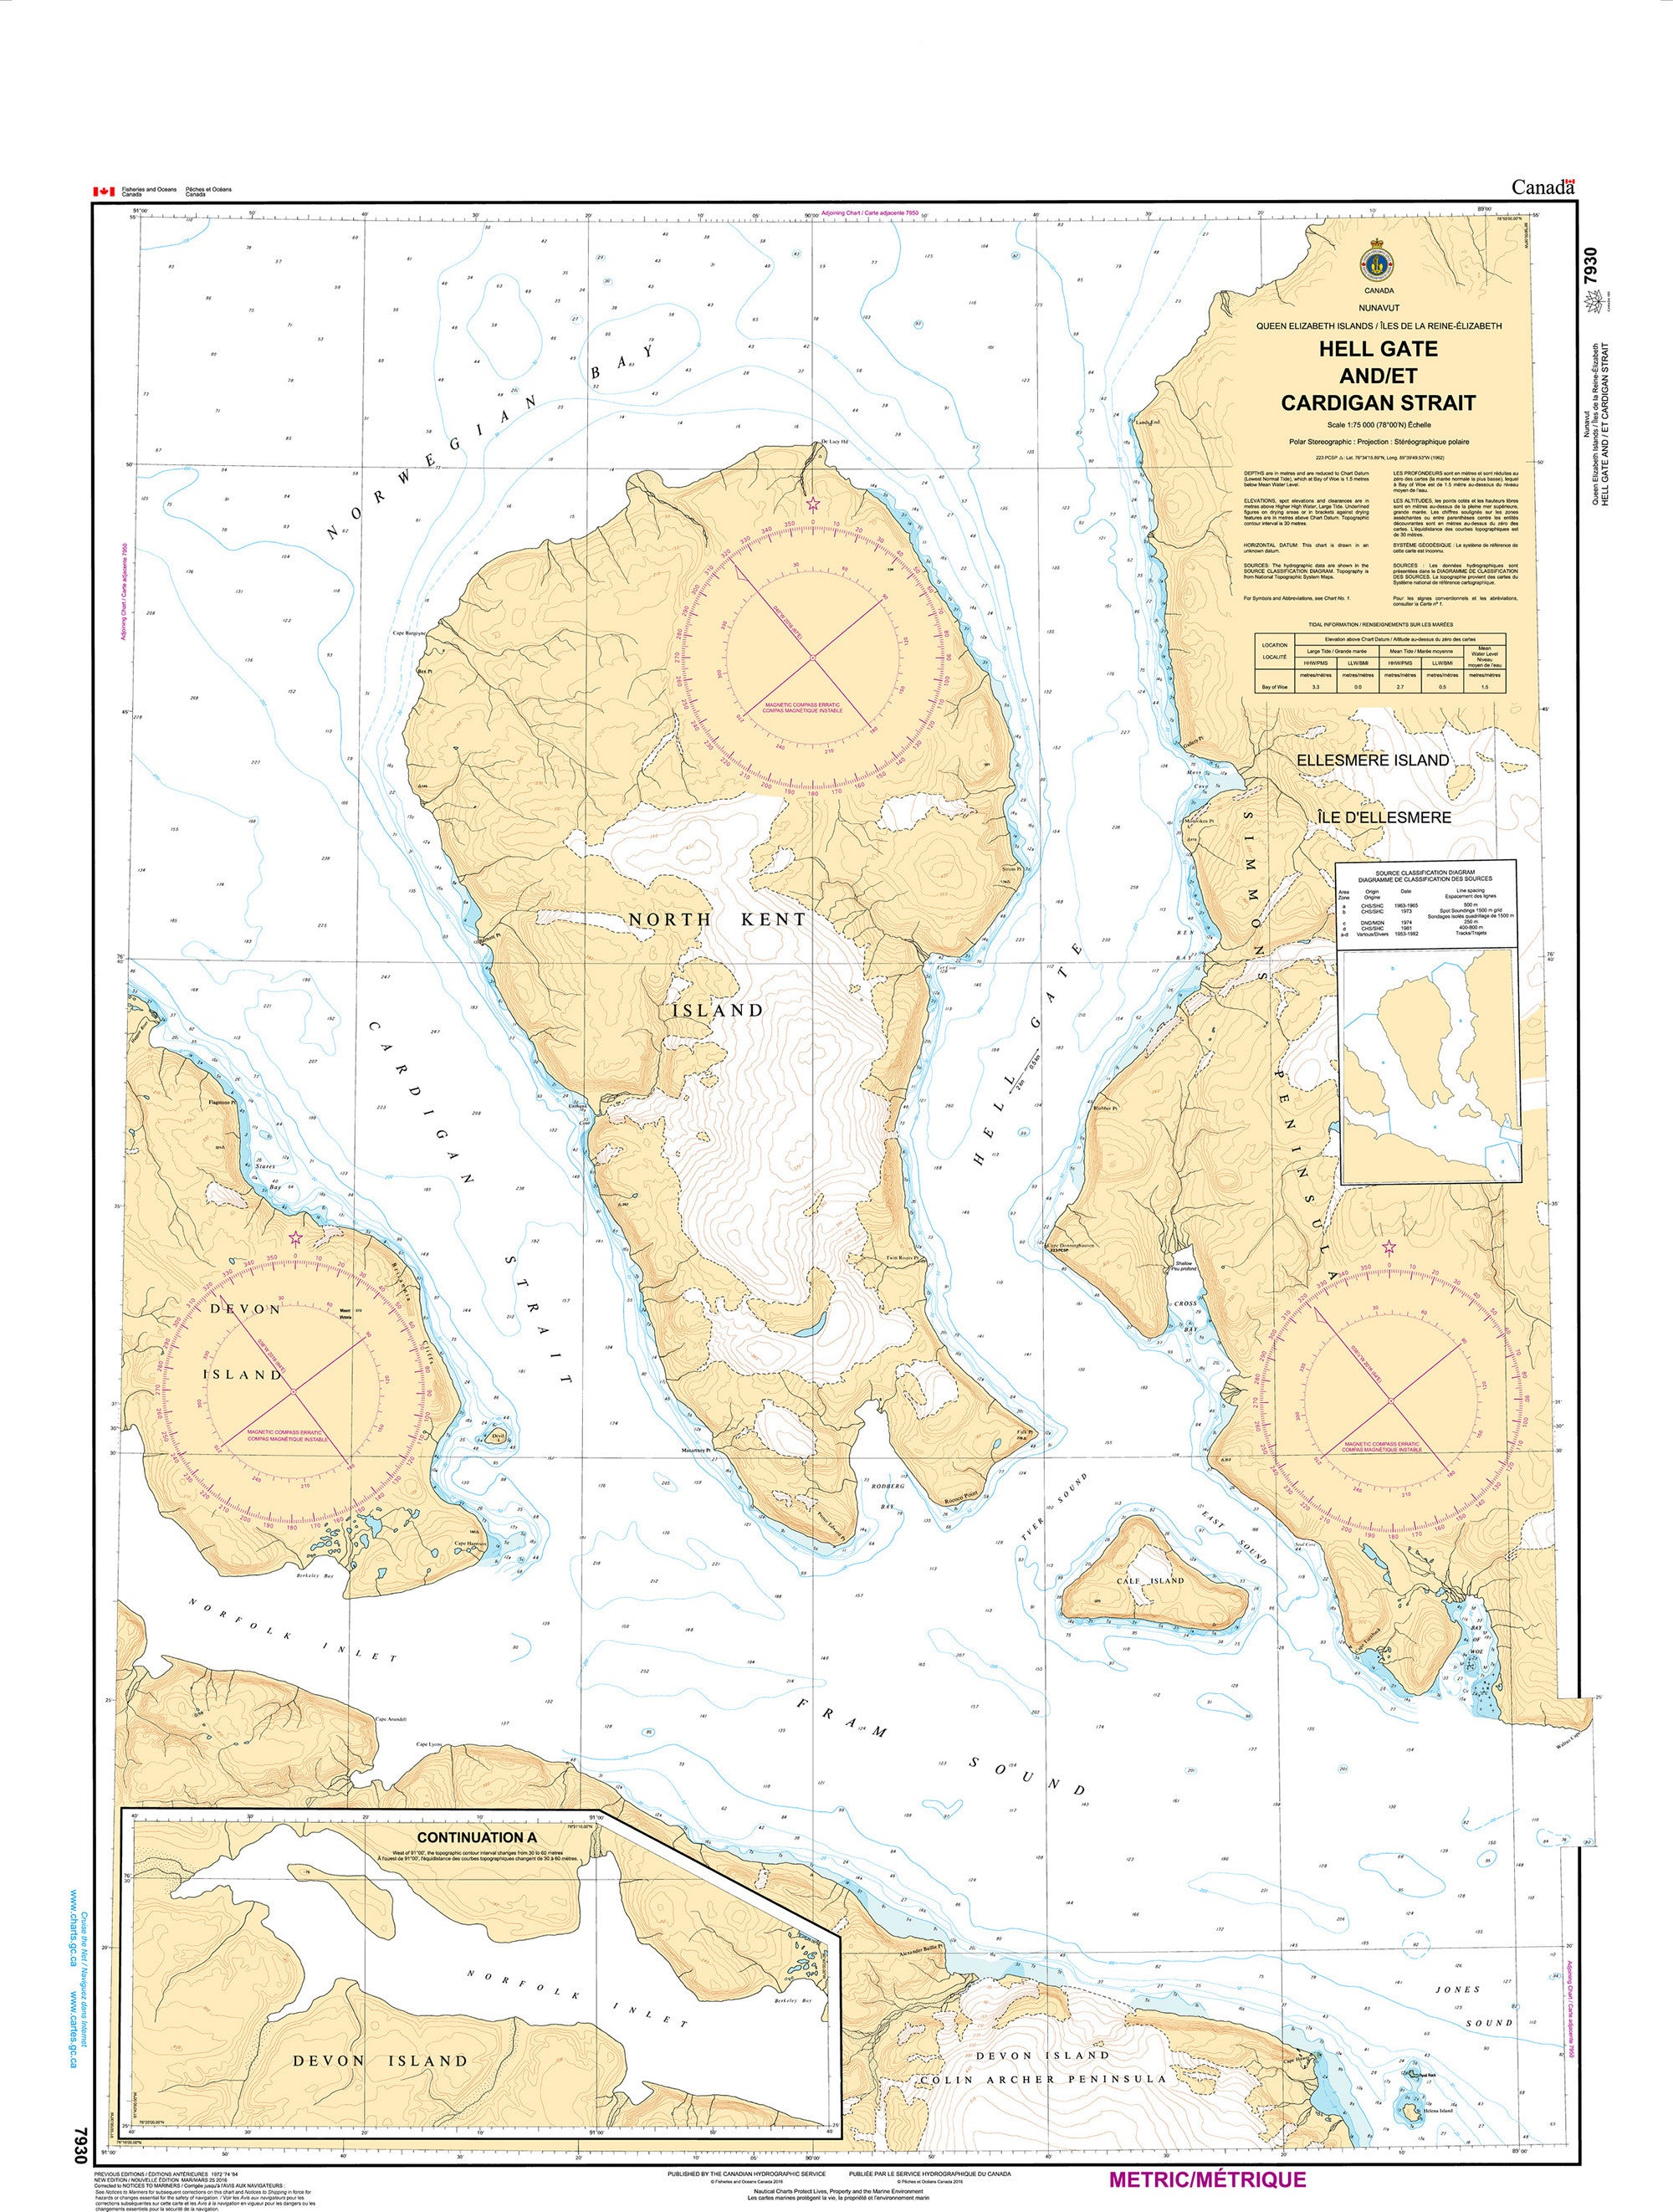 Canadian Hydrographic Service Nautical Chart CHS7930: Hell Gate and Cardigan Strait